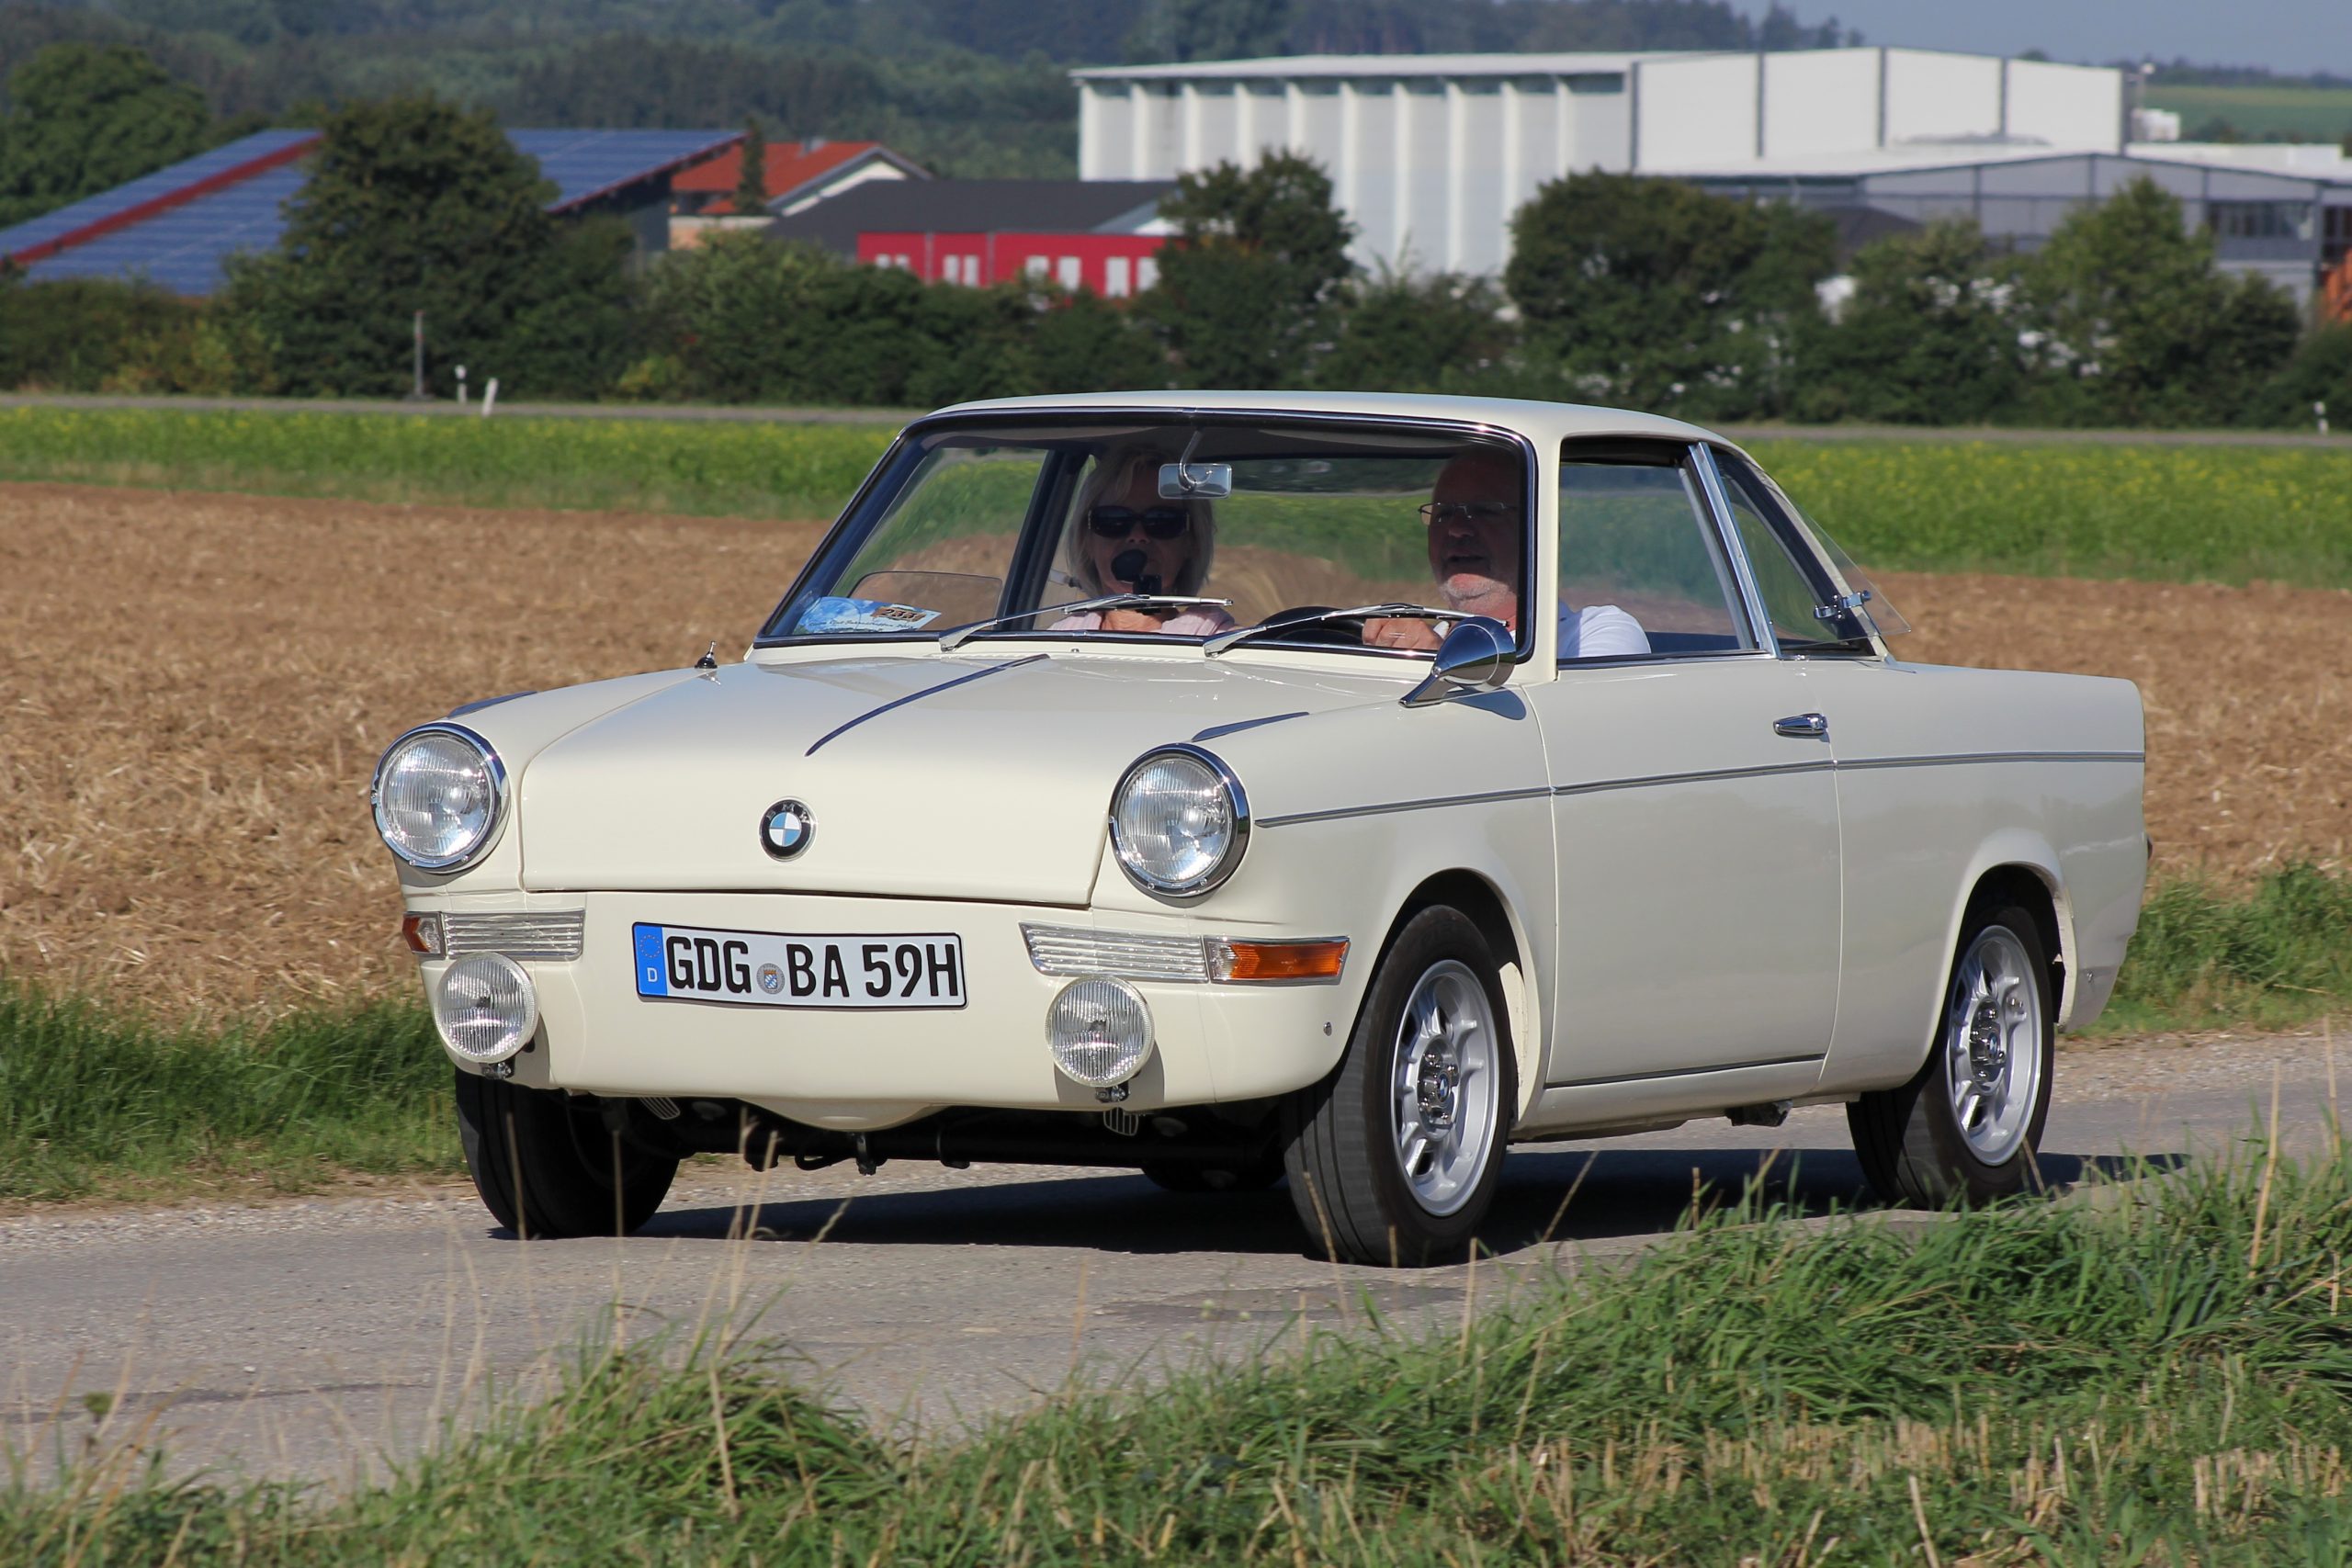 Bmw 700 Wallpapers